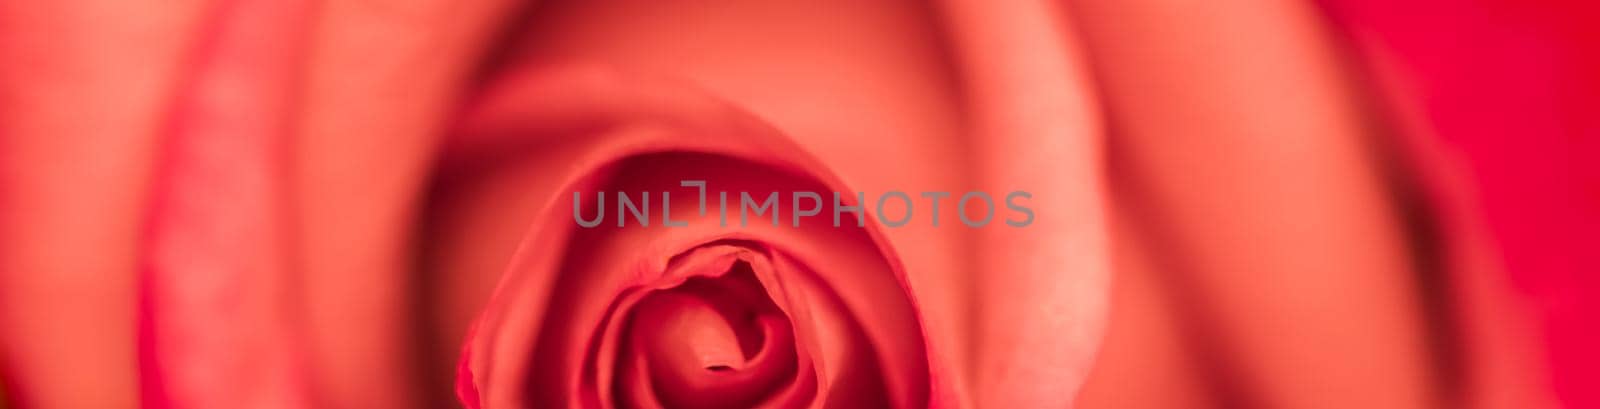 Soft focus, abstract floral background, red rose flower. Macro flowers backdrop for holiday brand design by Olayola